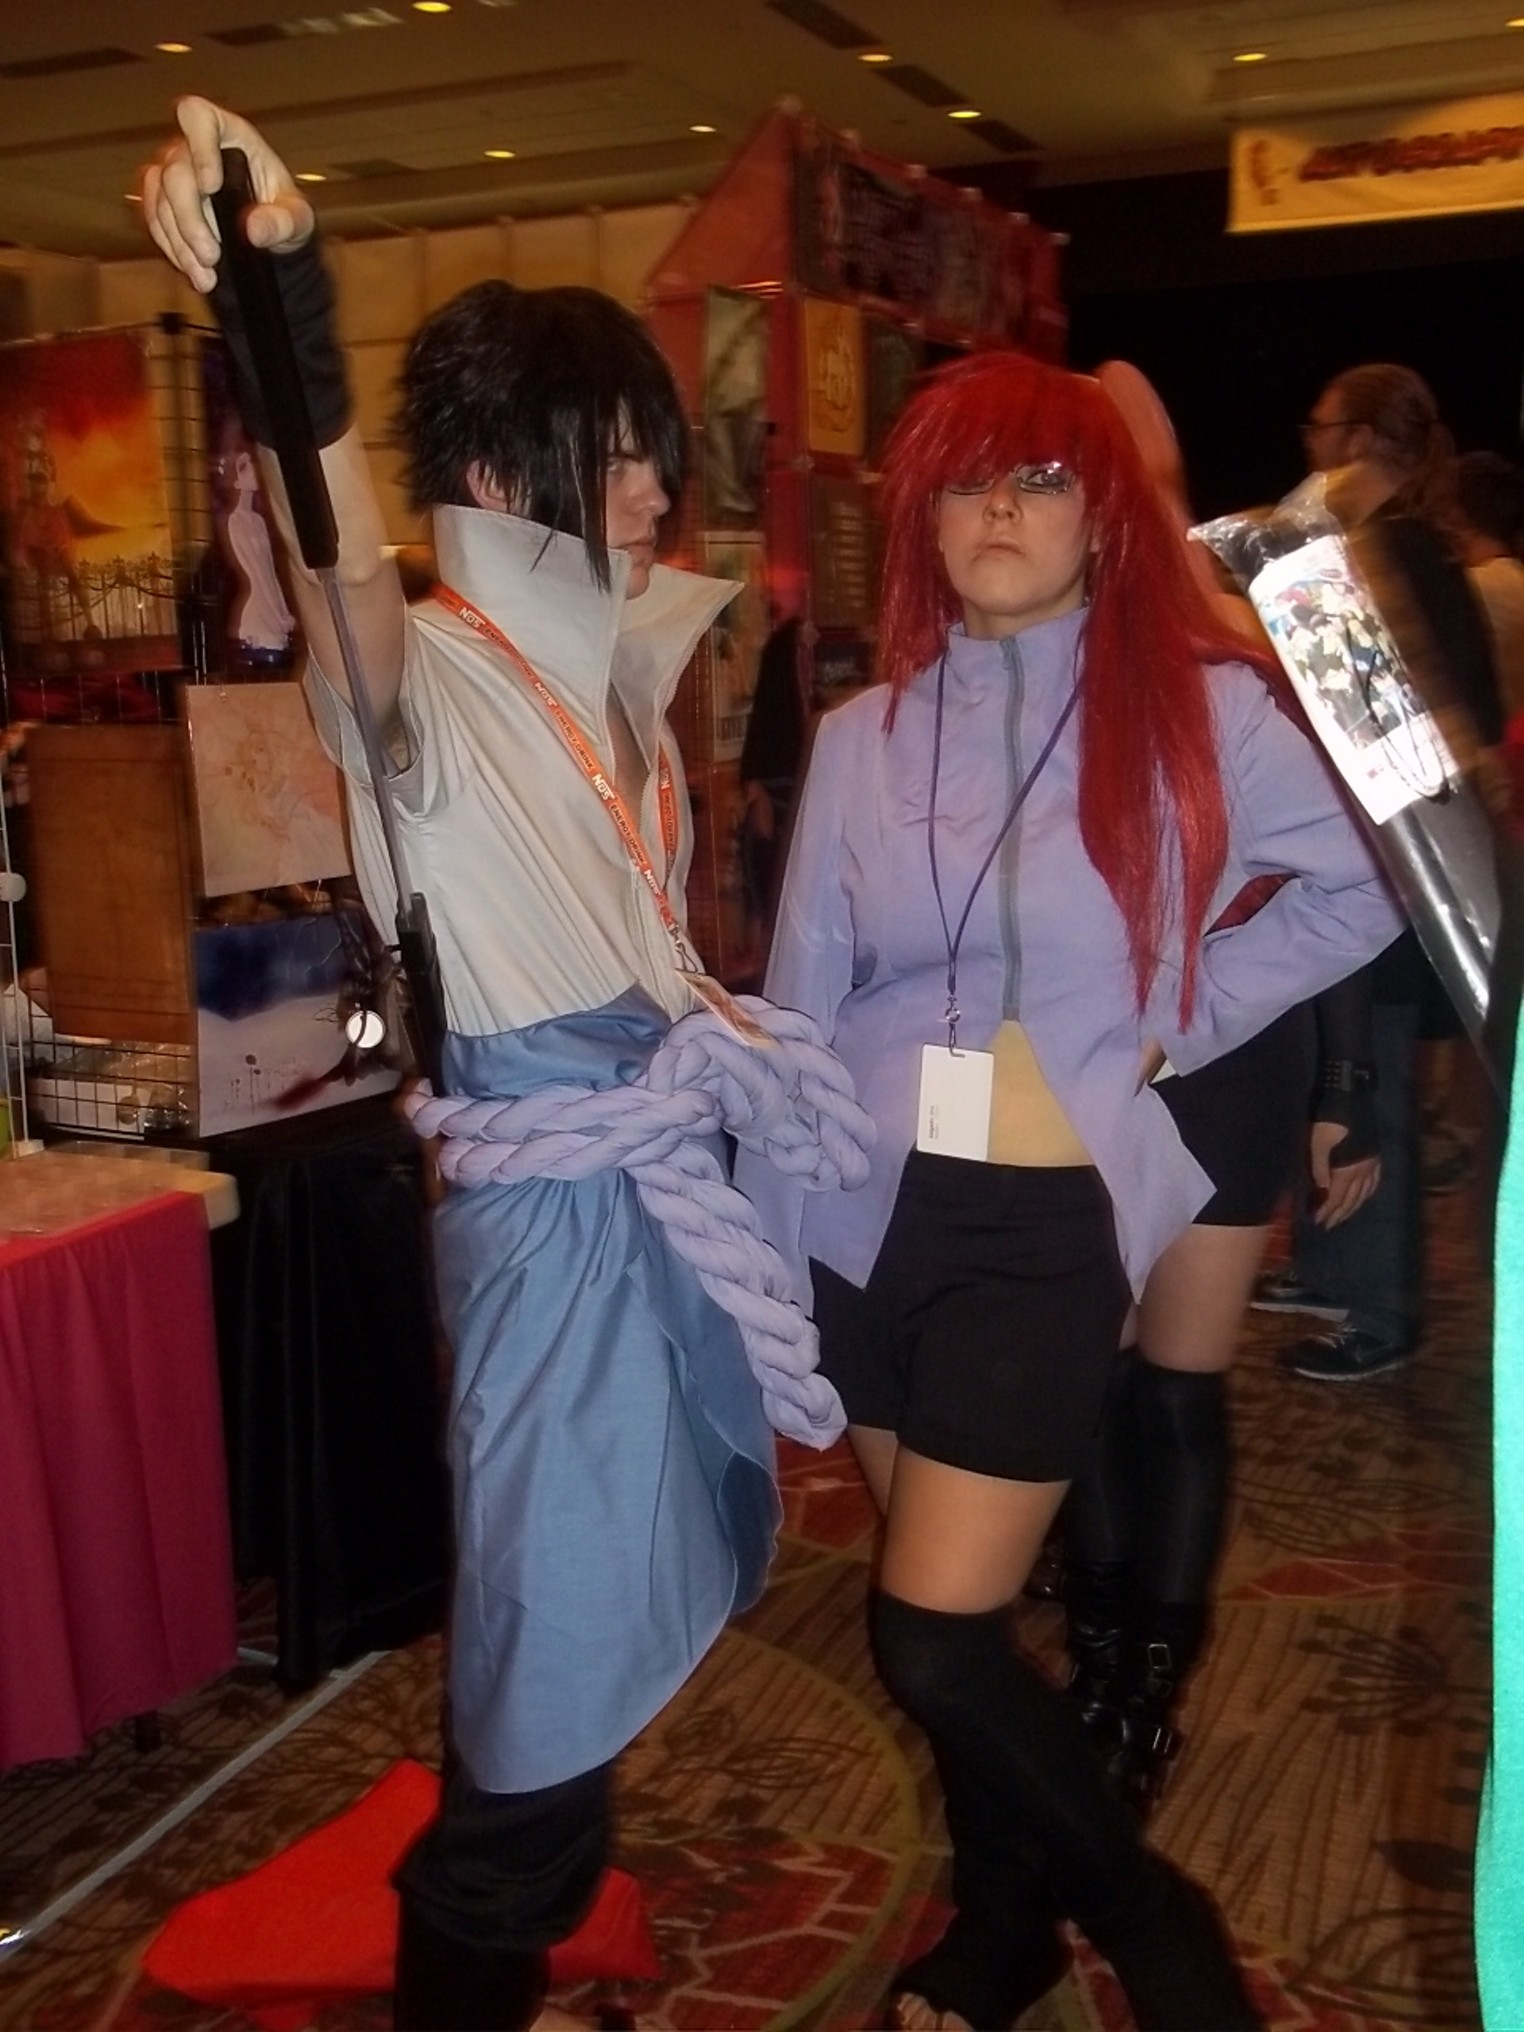 Our next event is Saboten Con A fantastic anime convention in downtown  Phoenix Visit their website for more inf  Downtown phoenix Anime  conventions Downtown